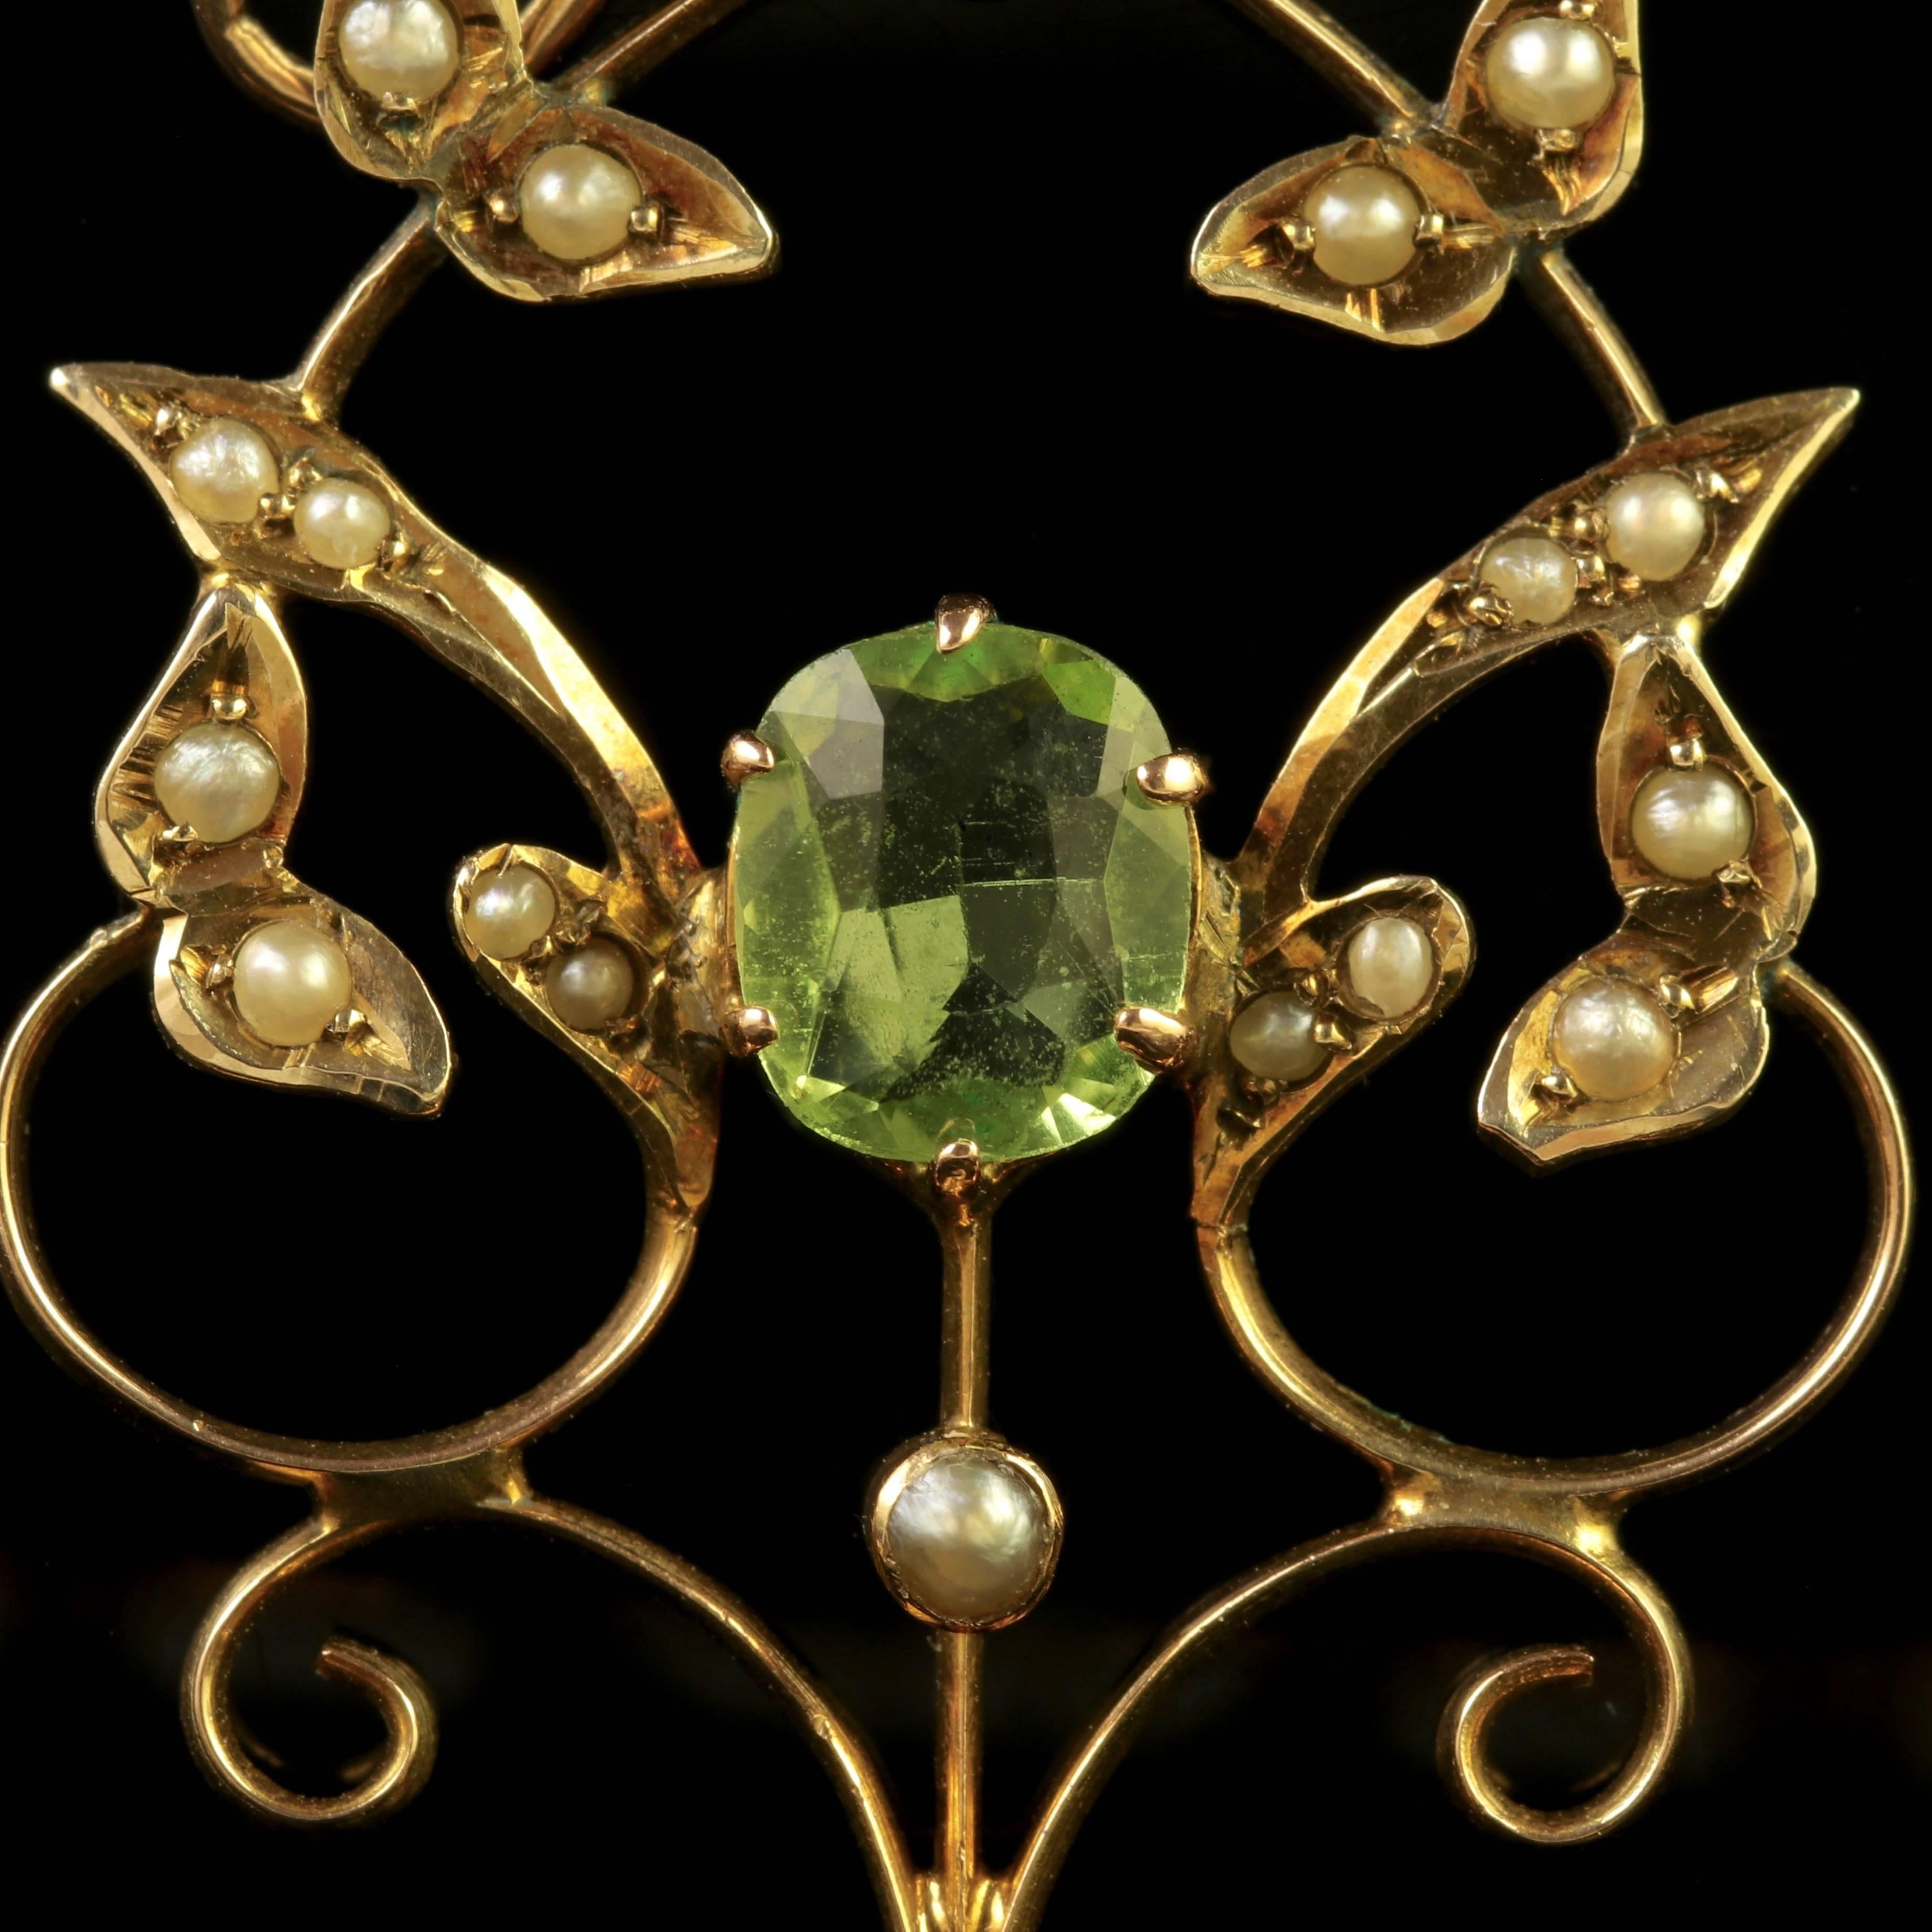 To read more please click continue reading below-

This beautiful antique 9ct Yellow Gold Peridot pendant is genuine Victorian, Circa 1900.

The lovely pendant is adorned with two rich green Peridots and decorated with fabulous Pearls.

The larger